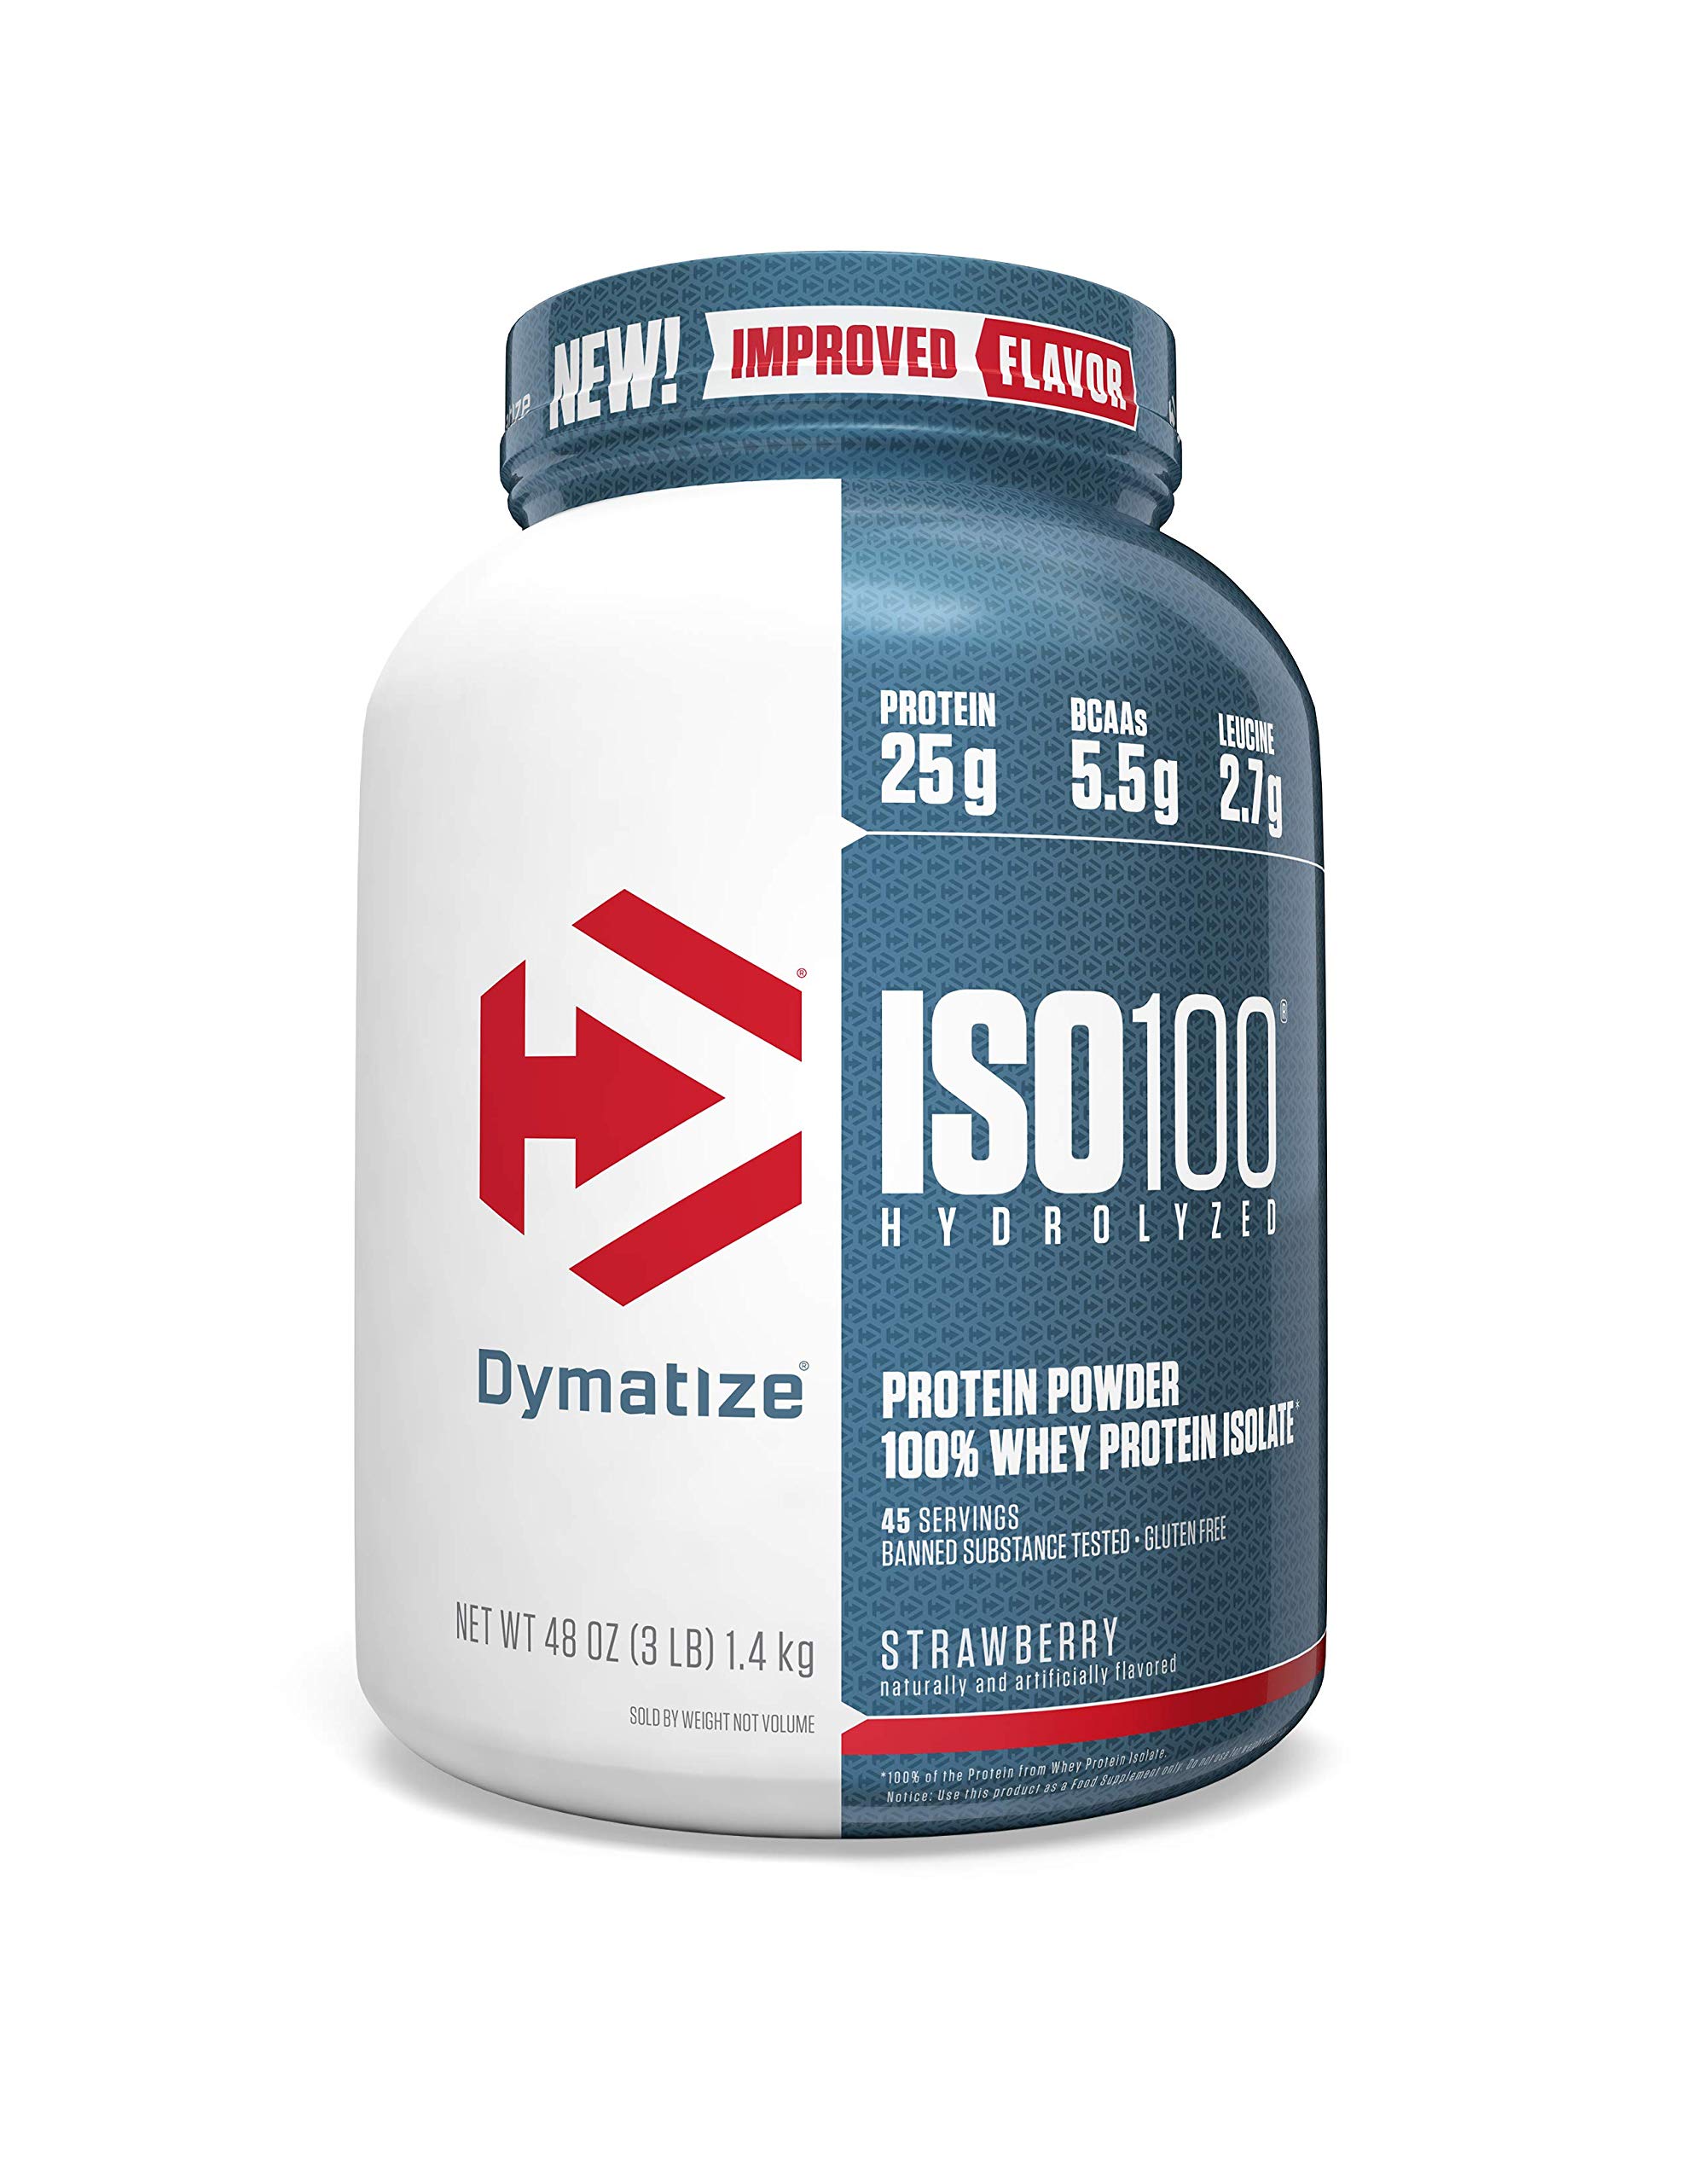 Book Cover Dymatize ISO100 Hydrolyzed Protein Powder, 100% Whey Isolate Protein, 25g of Protein, 5.5g BCAAs, Gluten Free, Fast Absorbing, Easy Digesting, Strawberry, 3 Pound